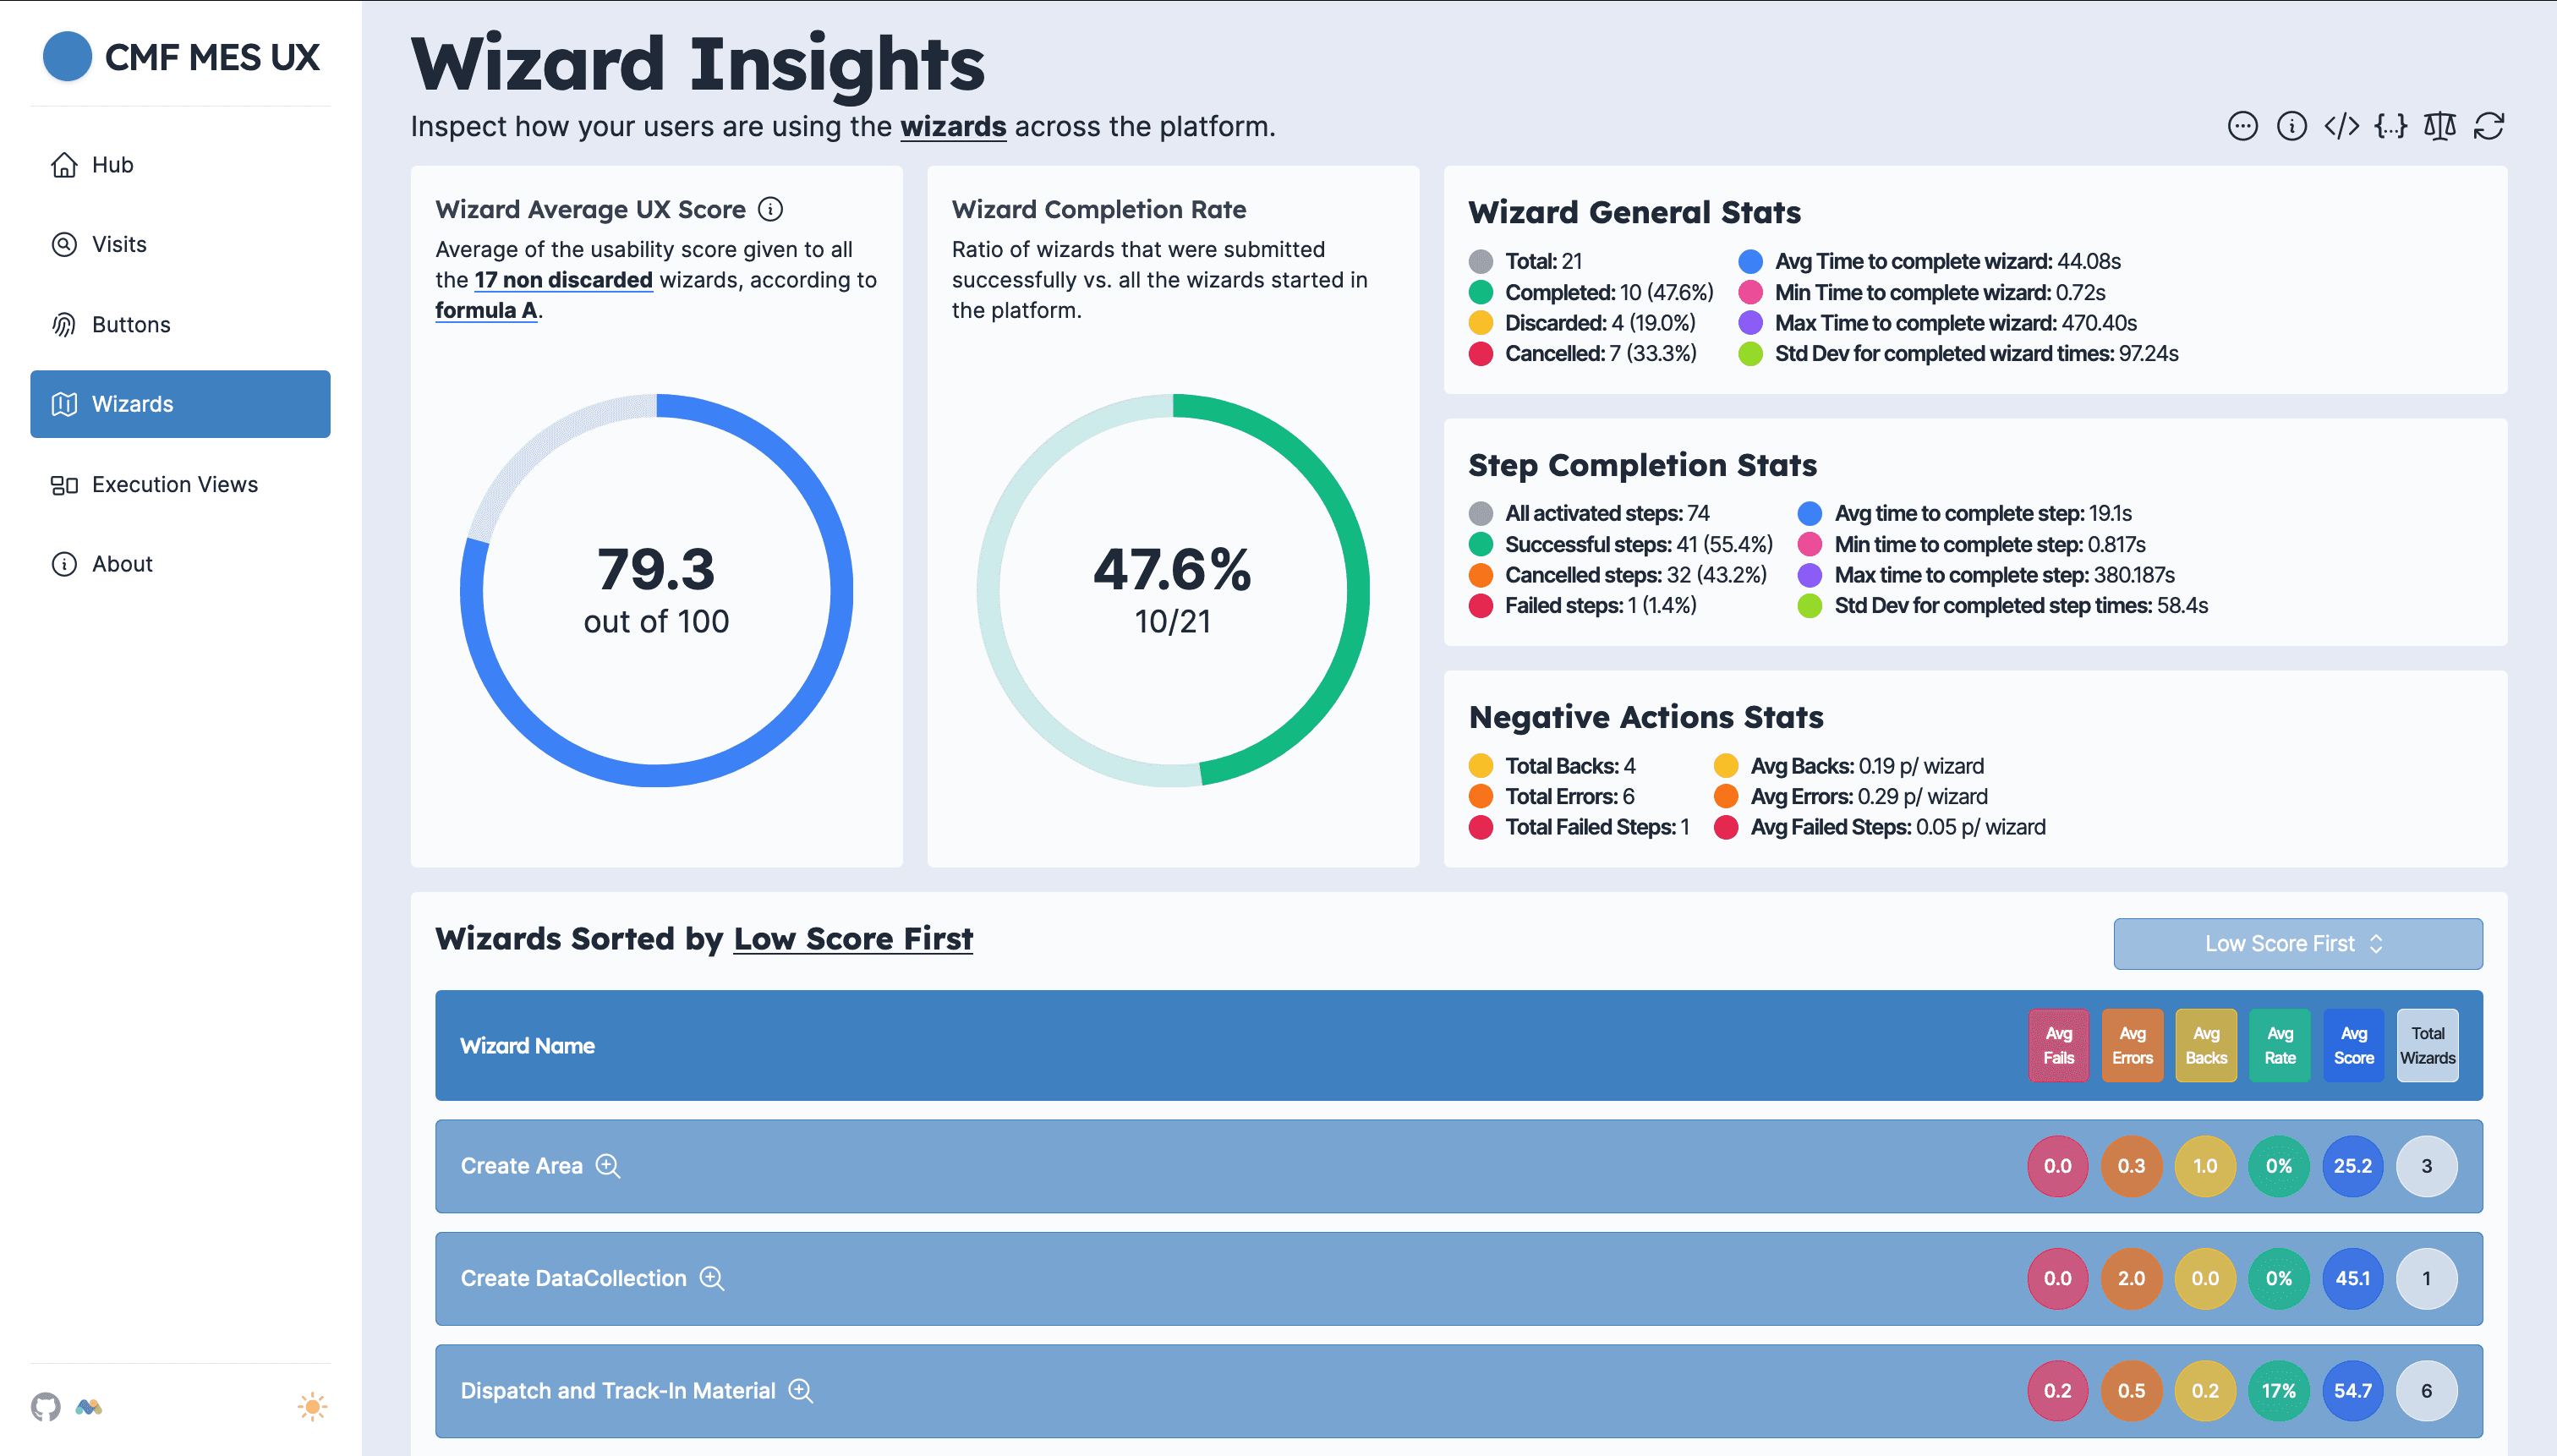 Analytics and Usability Dashboard for CMF's MES: Media 1